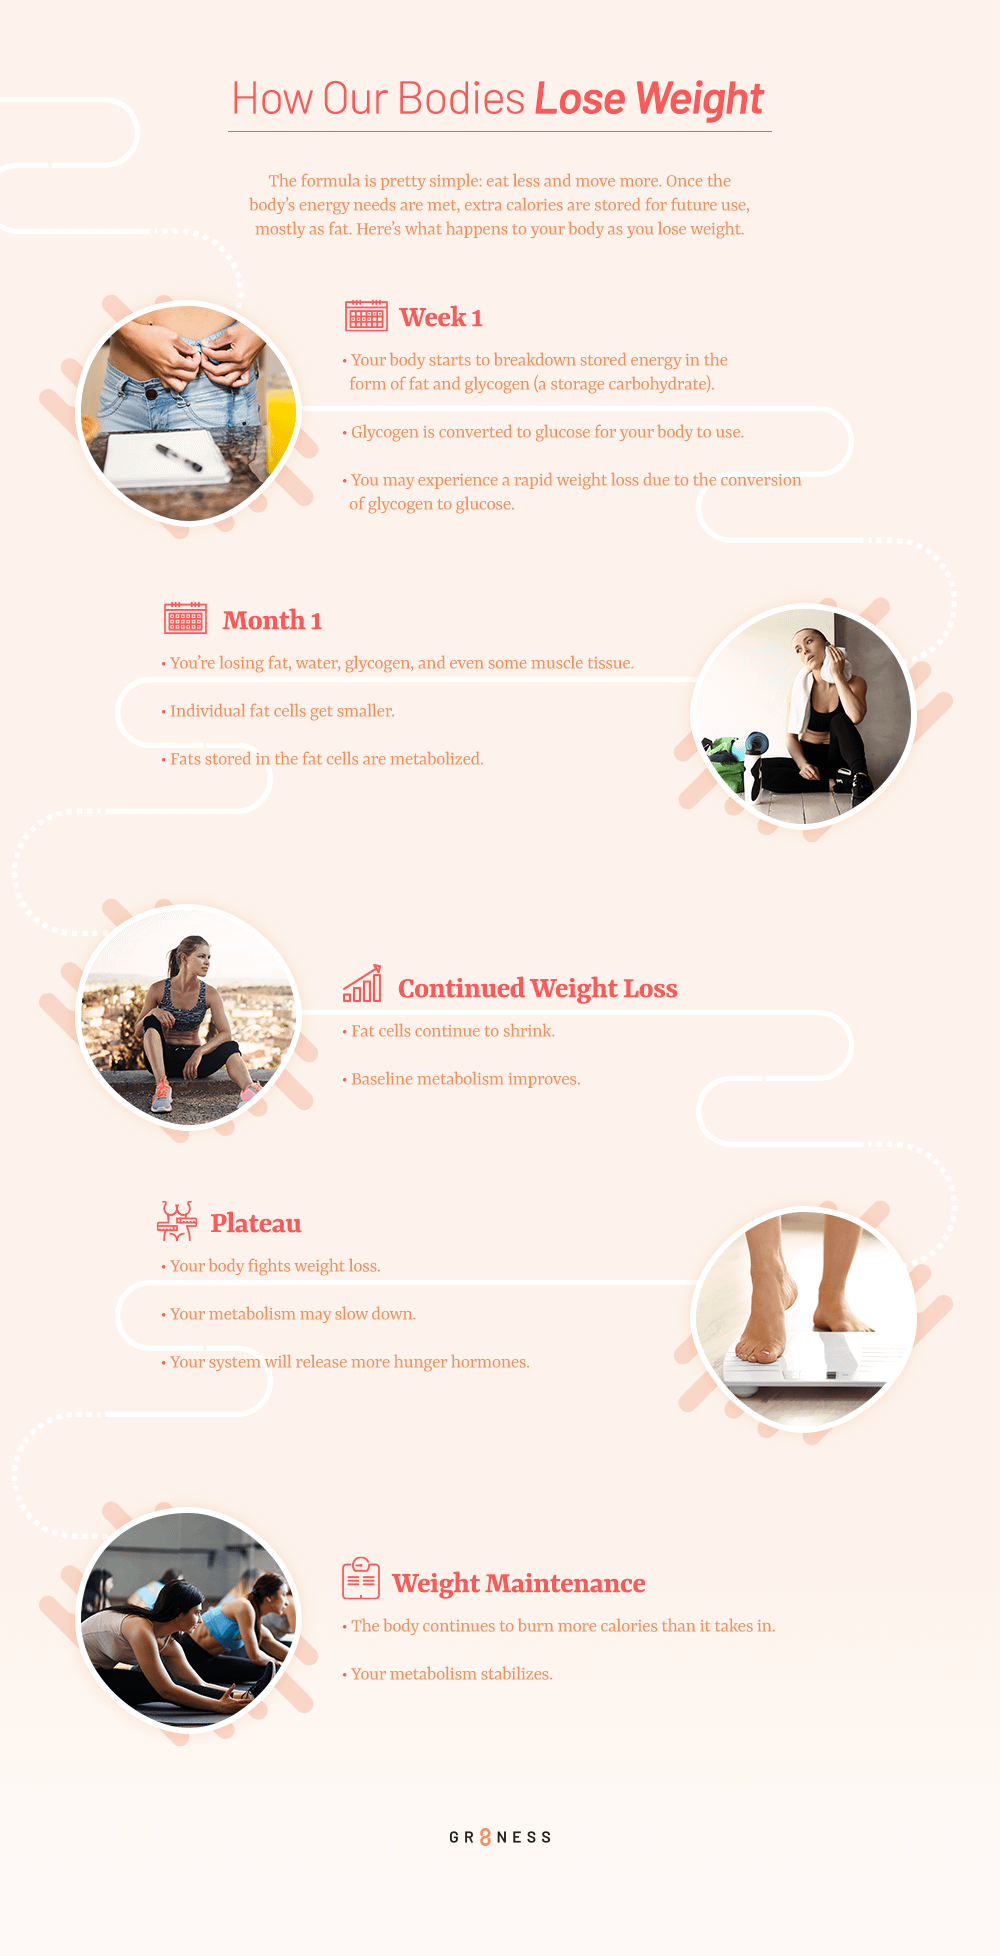 Step by step guide about how our body loses weight overtime